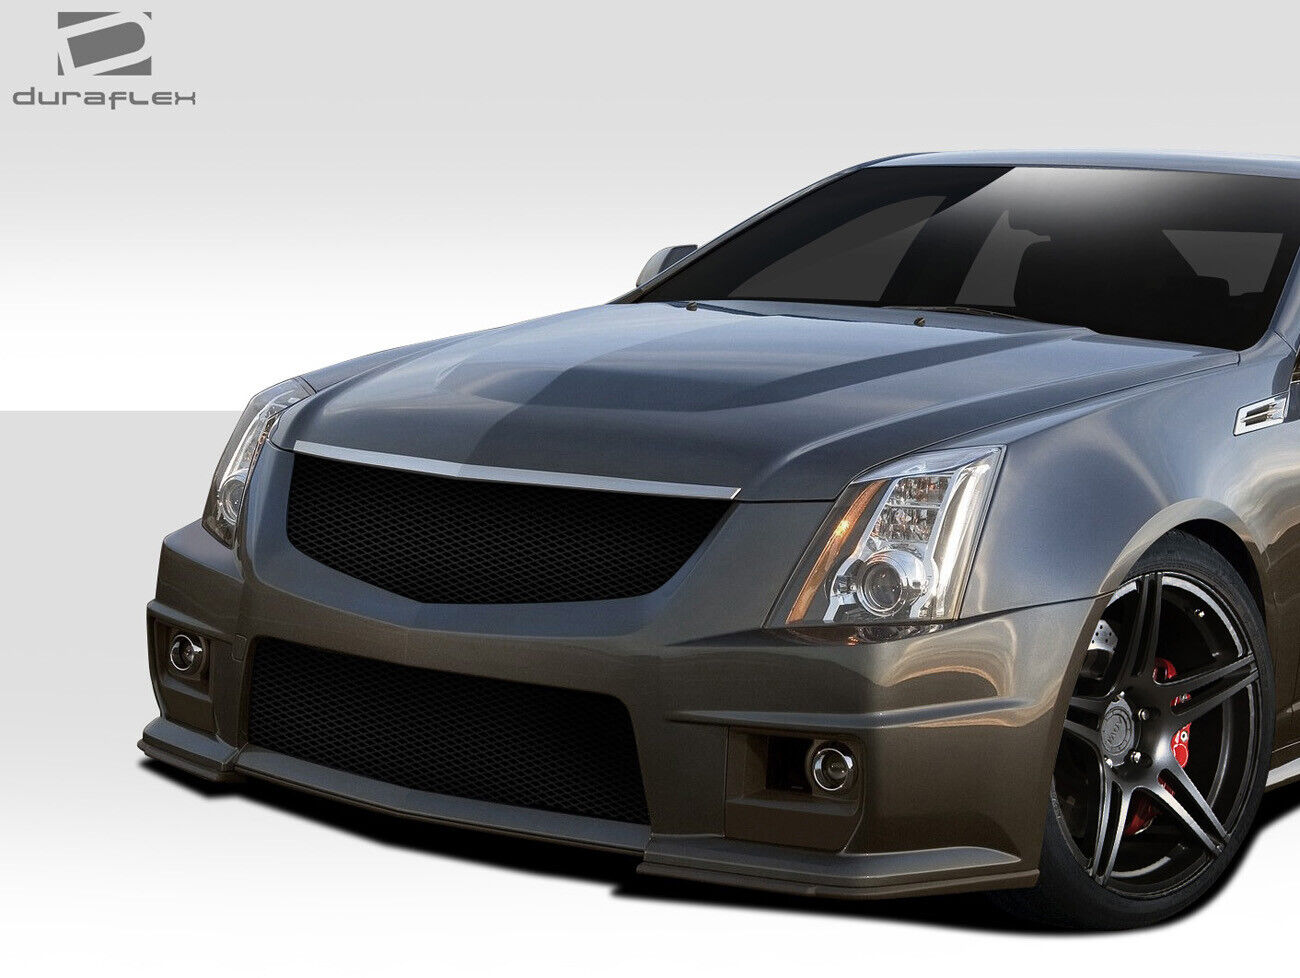 Duraflex CTS-V Look Front Bumper Body Kit for 08-13 Cadillac CTS